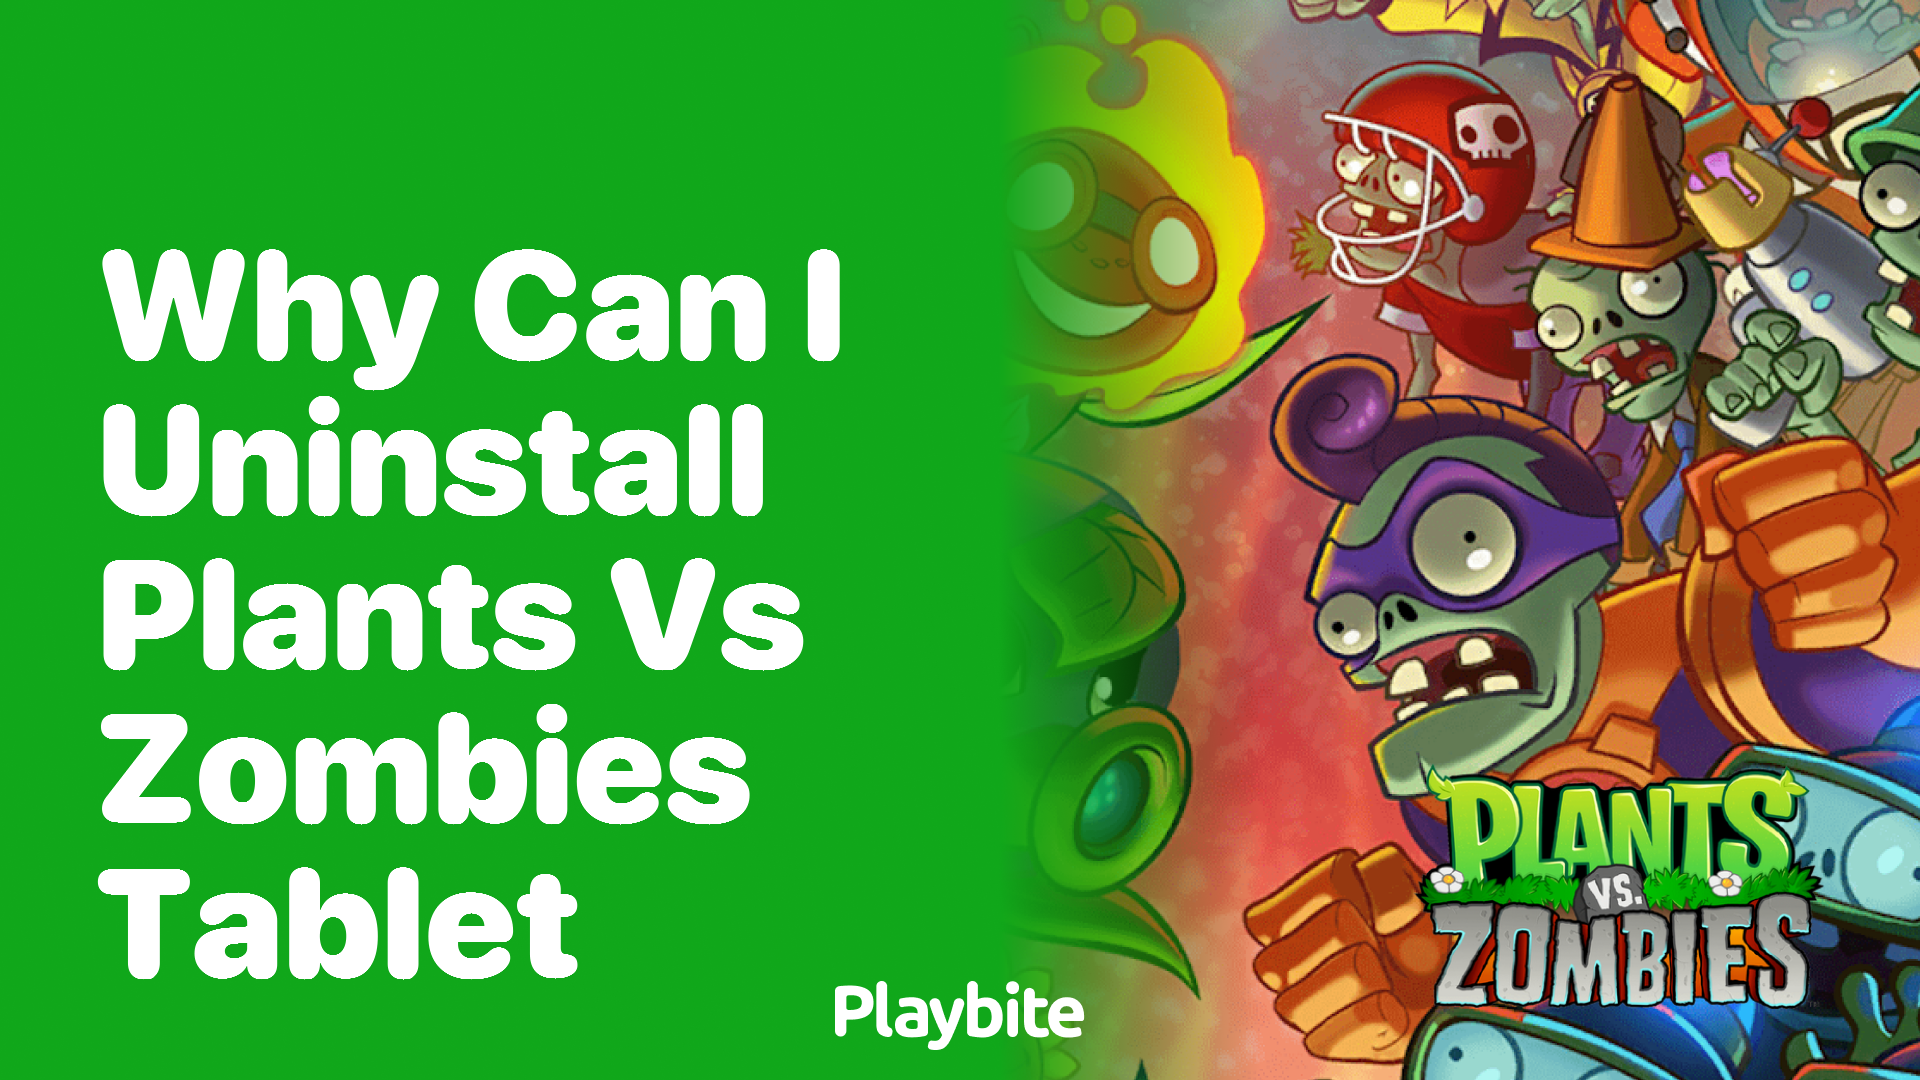 Why can I uninstall Plants vs Zombies on my tablet?